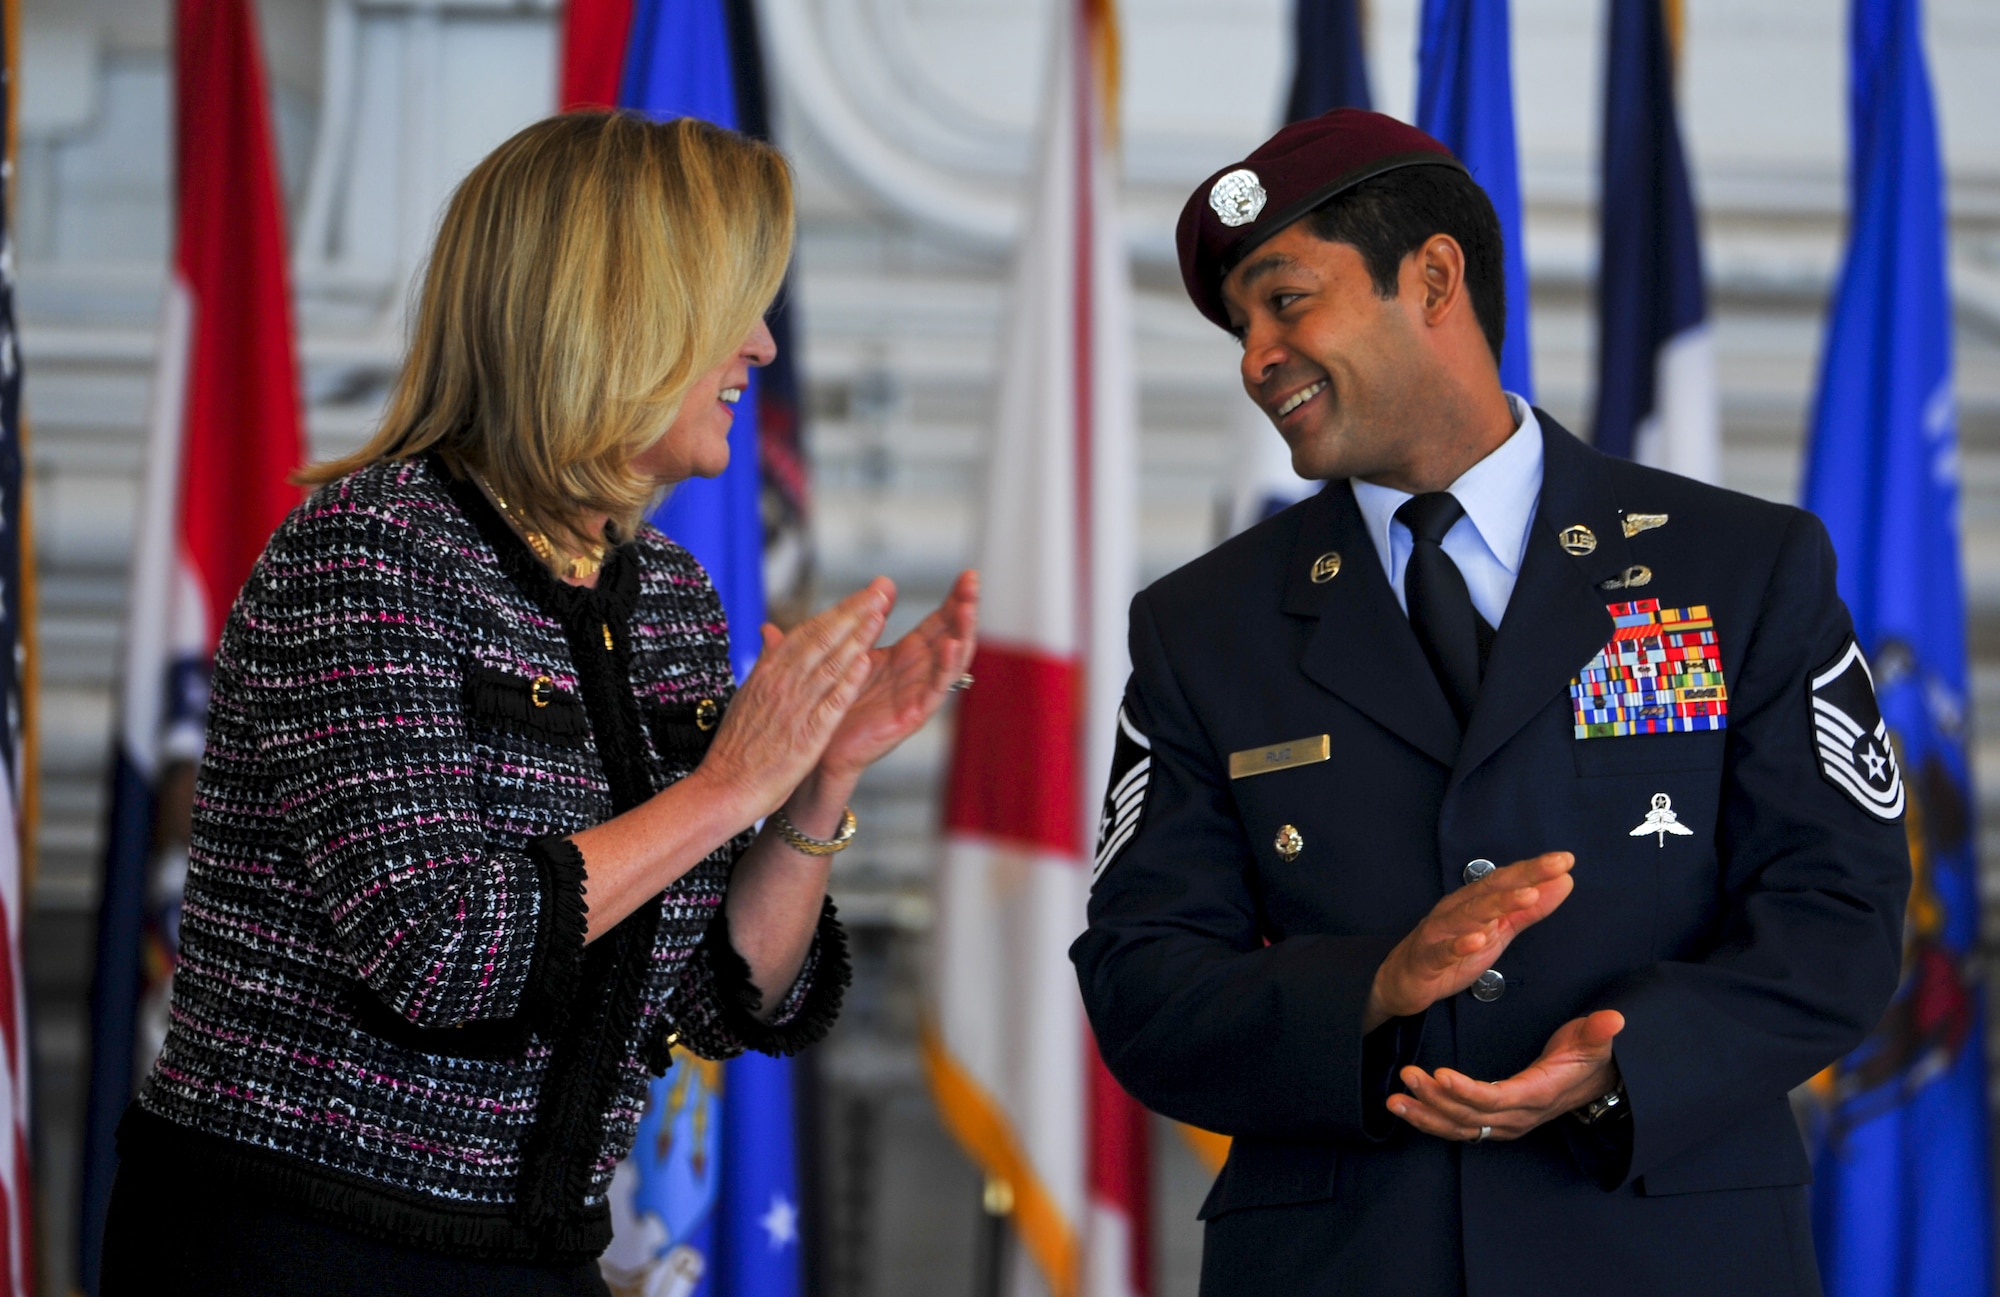 Secretary of the Air Force Deborah Lee James congratulates Master Sgt. Ivan Ruiz, a pararescueman from the 56th Rescue Squadron, Royal Air Force Lakenheath, England, on receiving the Air Force Cross at the Freedom Hangar on Hurlburt Field, Fla., Dec. 17, 2014. Ruiz is the sixth U.S. military member to receive the nation’s second highest military decoration since 9/11. (U.S. Air Force photo/Senior Airman Christopher Callaway) 